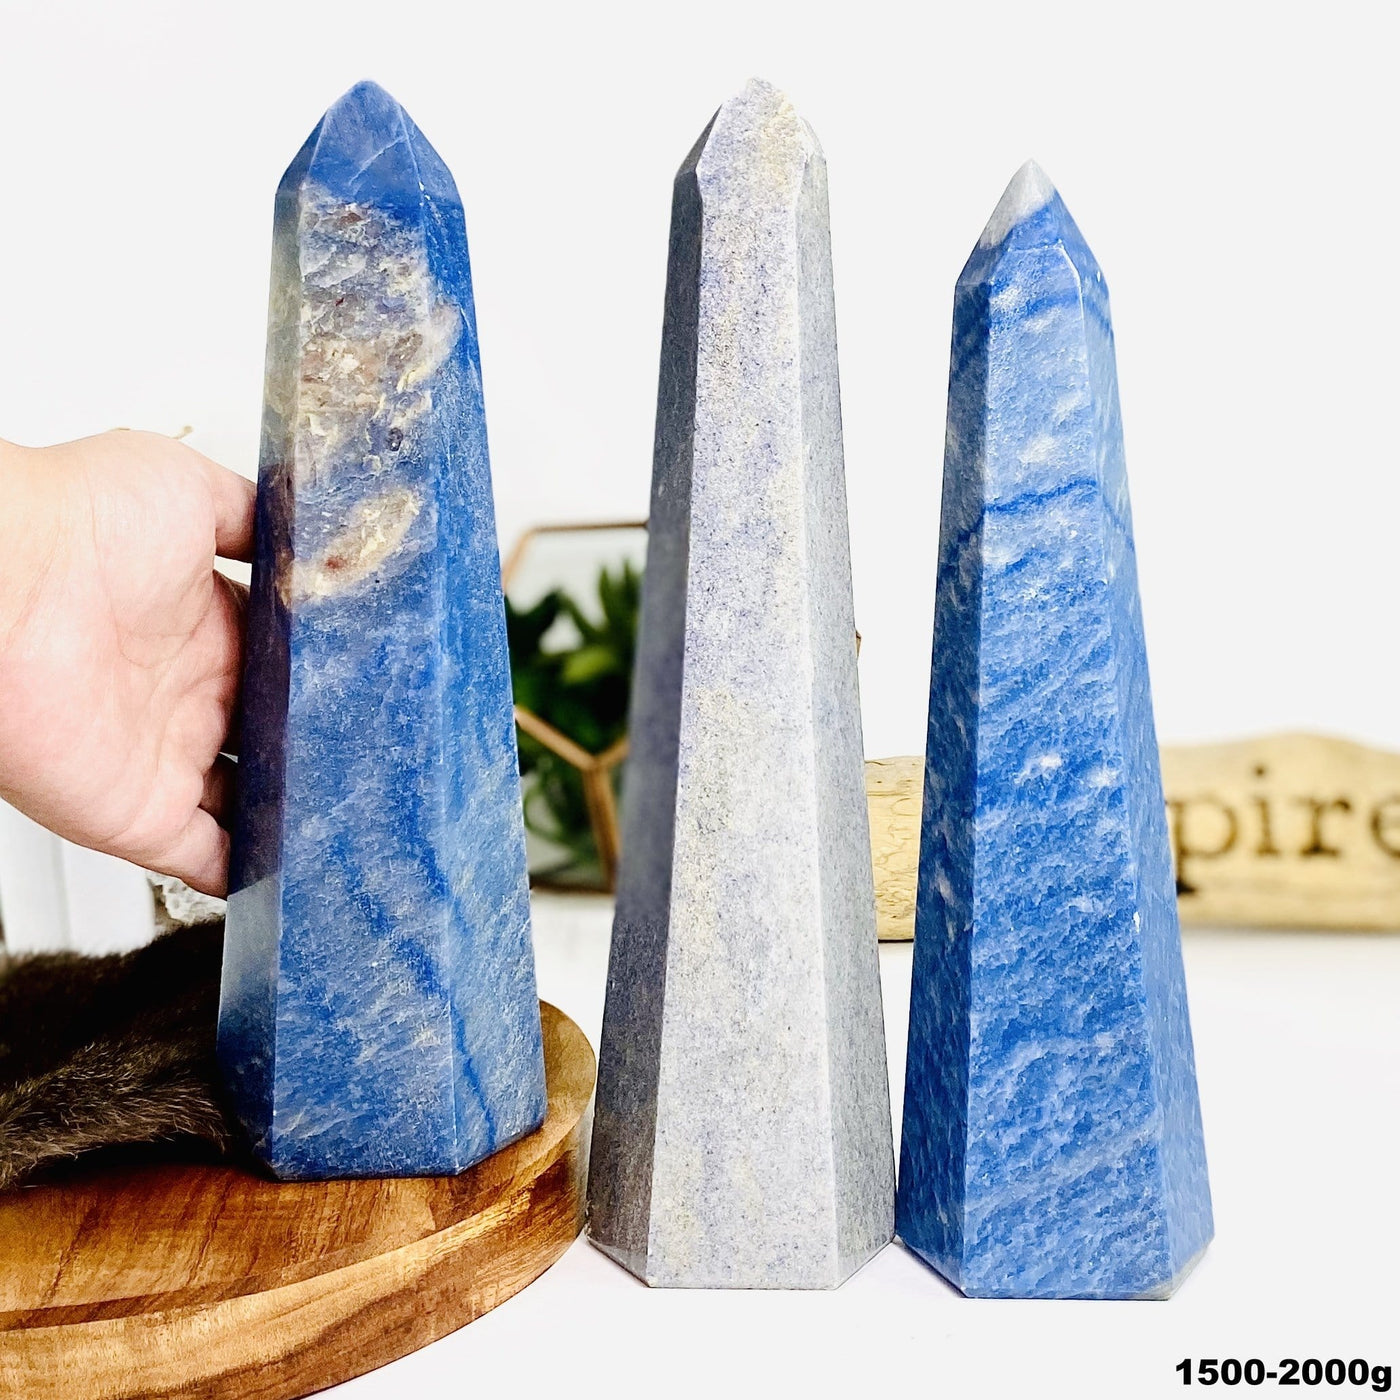 Three Blue Quartz Tower Points weighing at 1500-2000g in a variety of sizes